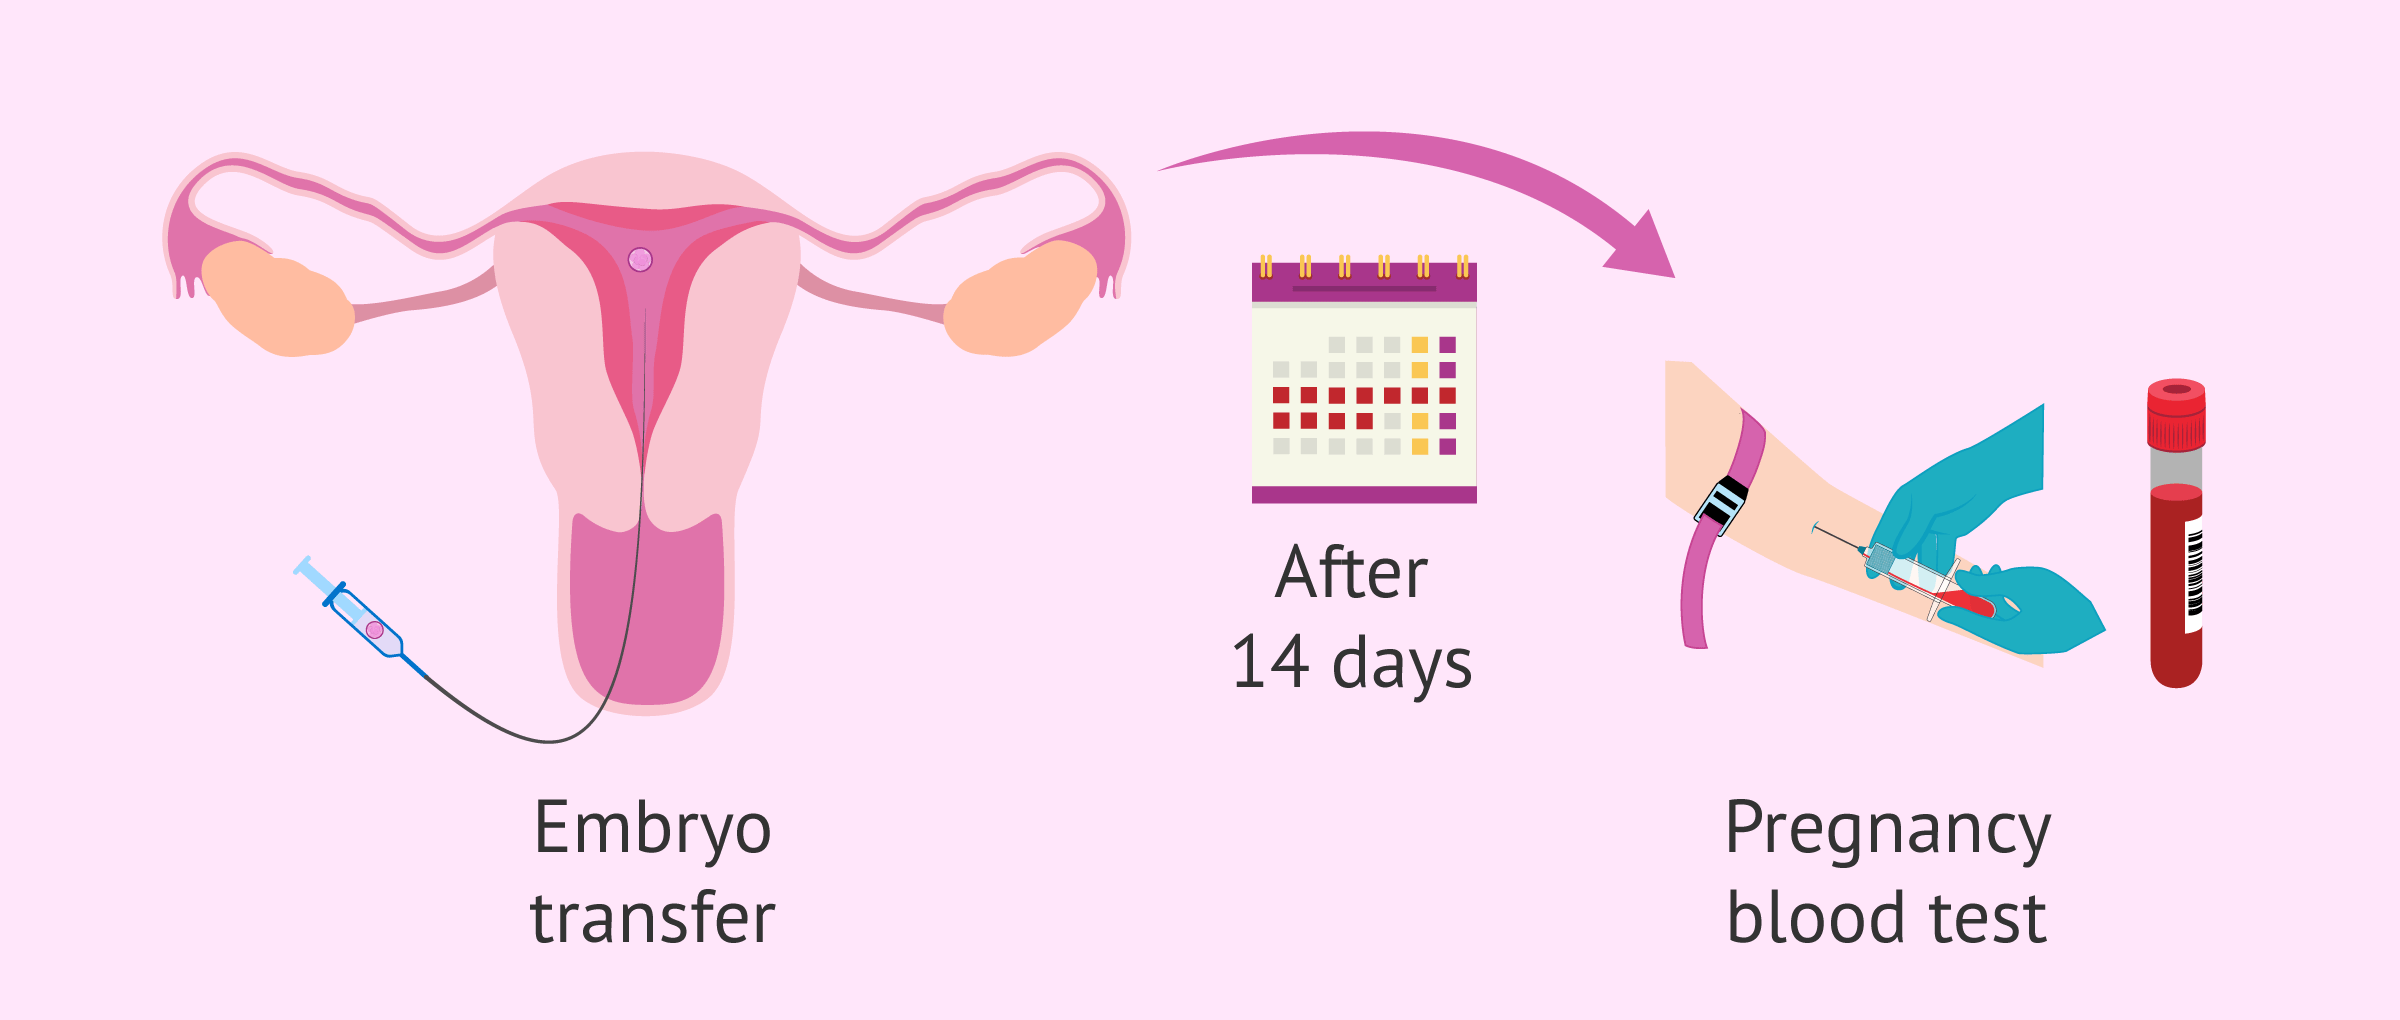 When to take a pregnancy test after IVF?